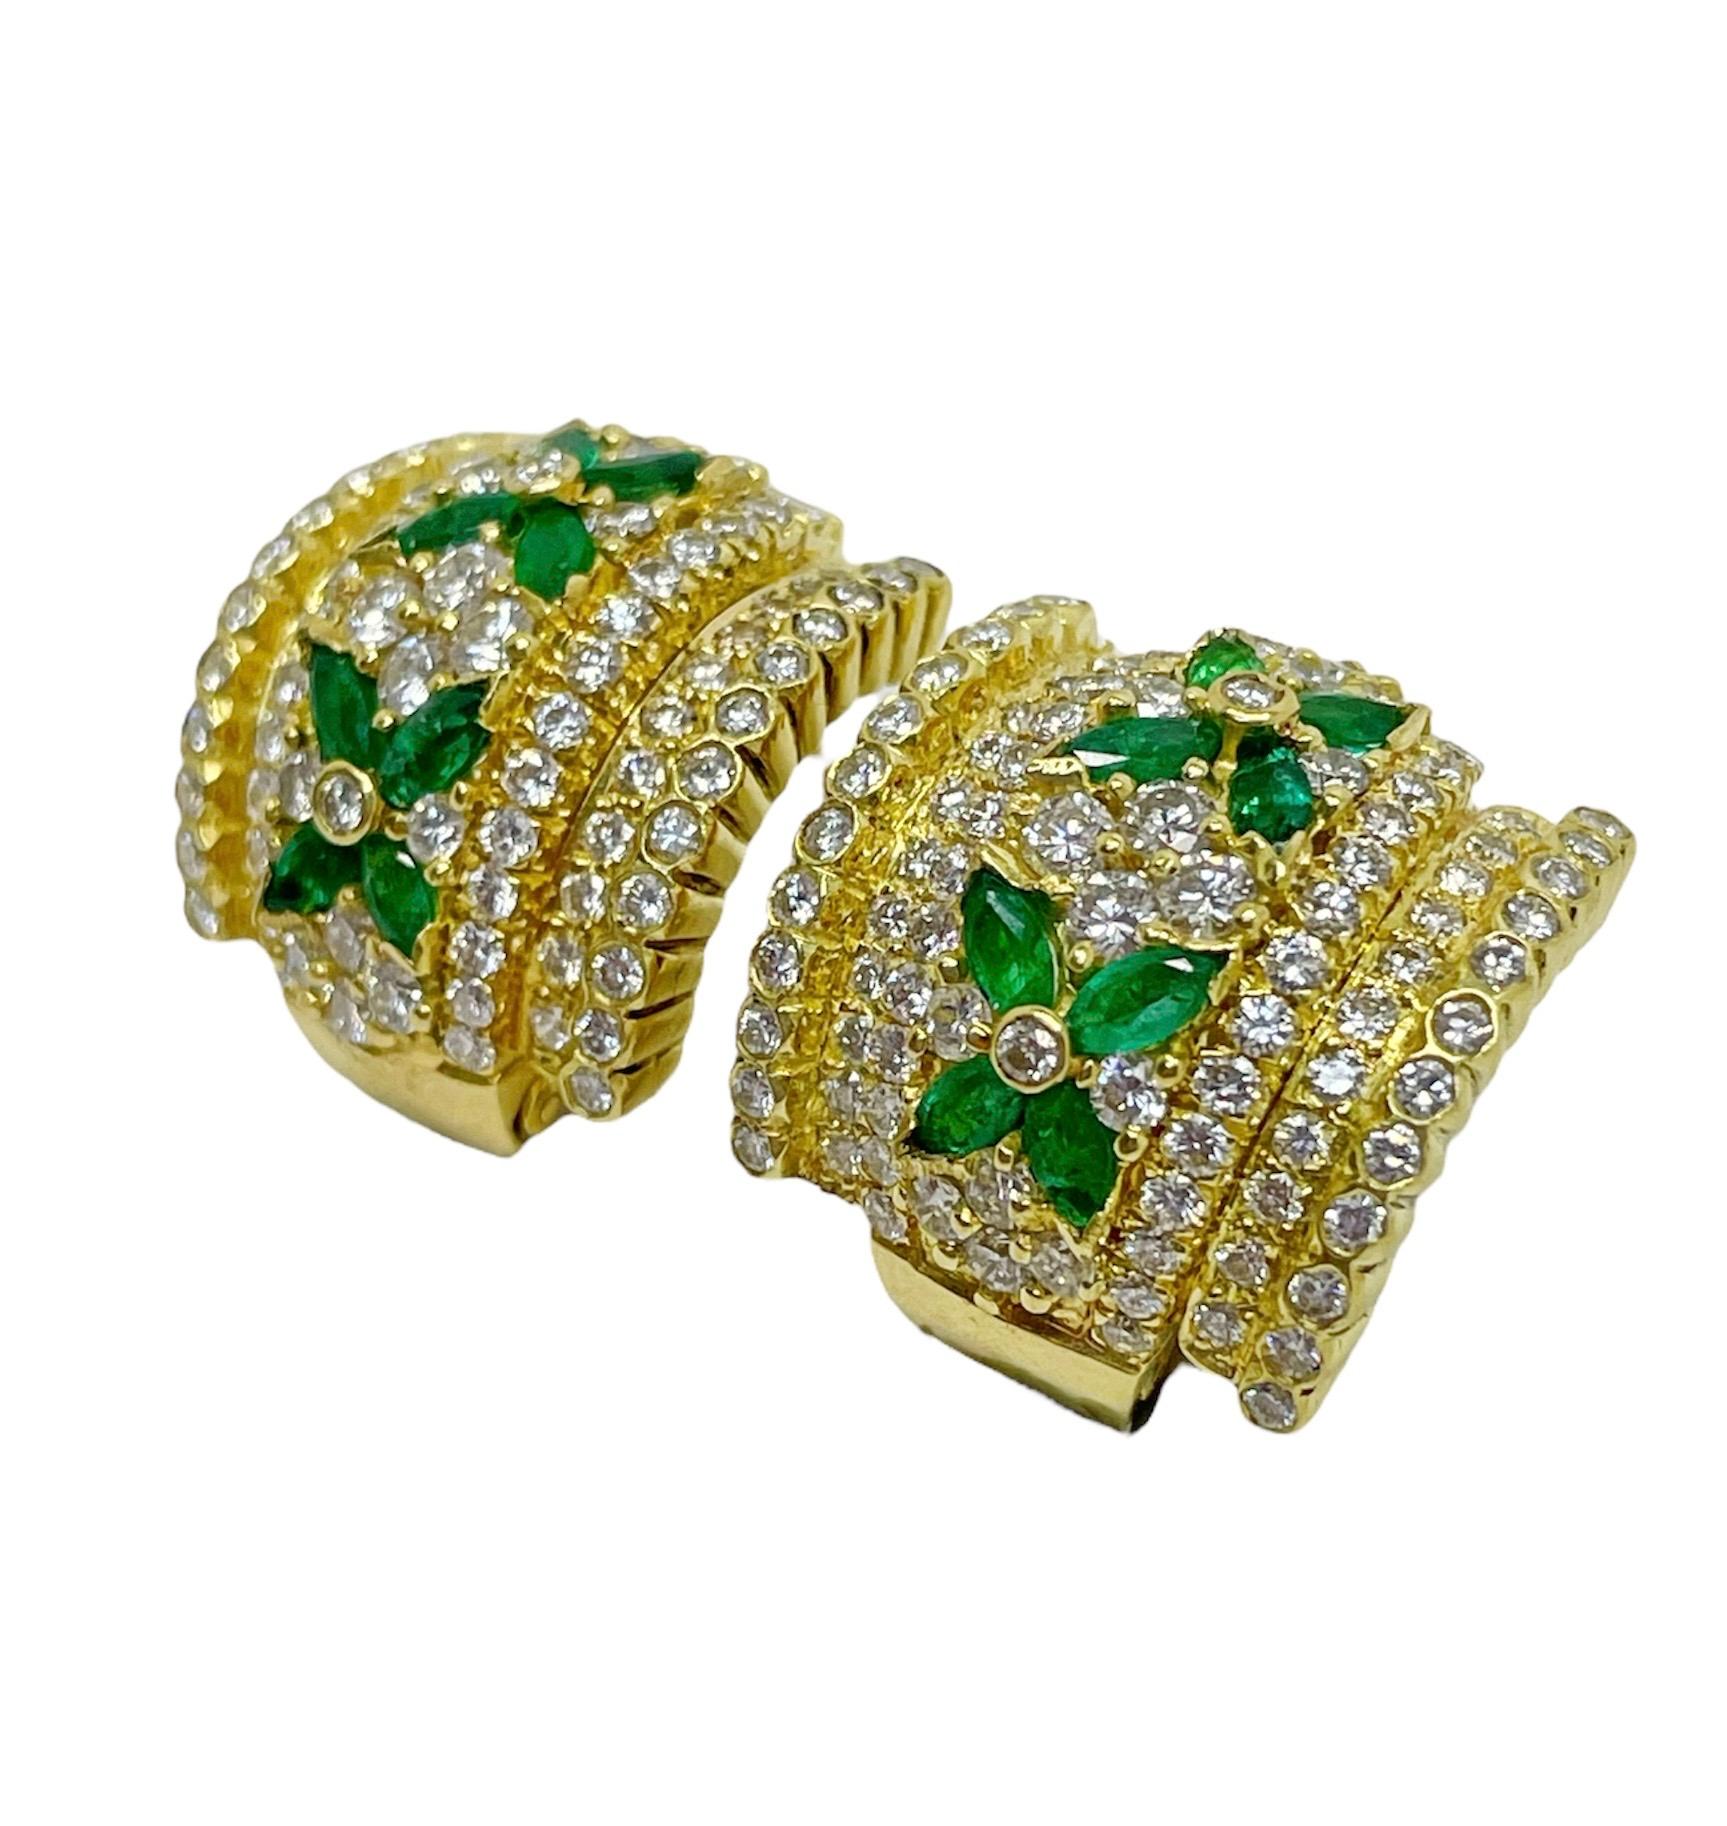 These gorgeously classic earrings by Tiffany & Co. contain 184 round brilliant cut diamonds weighing approximately 3.50 carats total with eight marquise cut emeralds in a floral motif. Mounted in 18 karat yellow gold and skillfully crafted, these